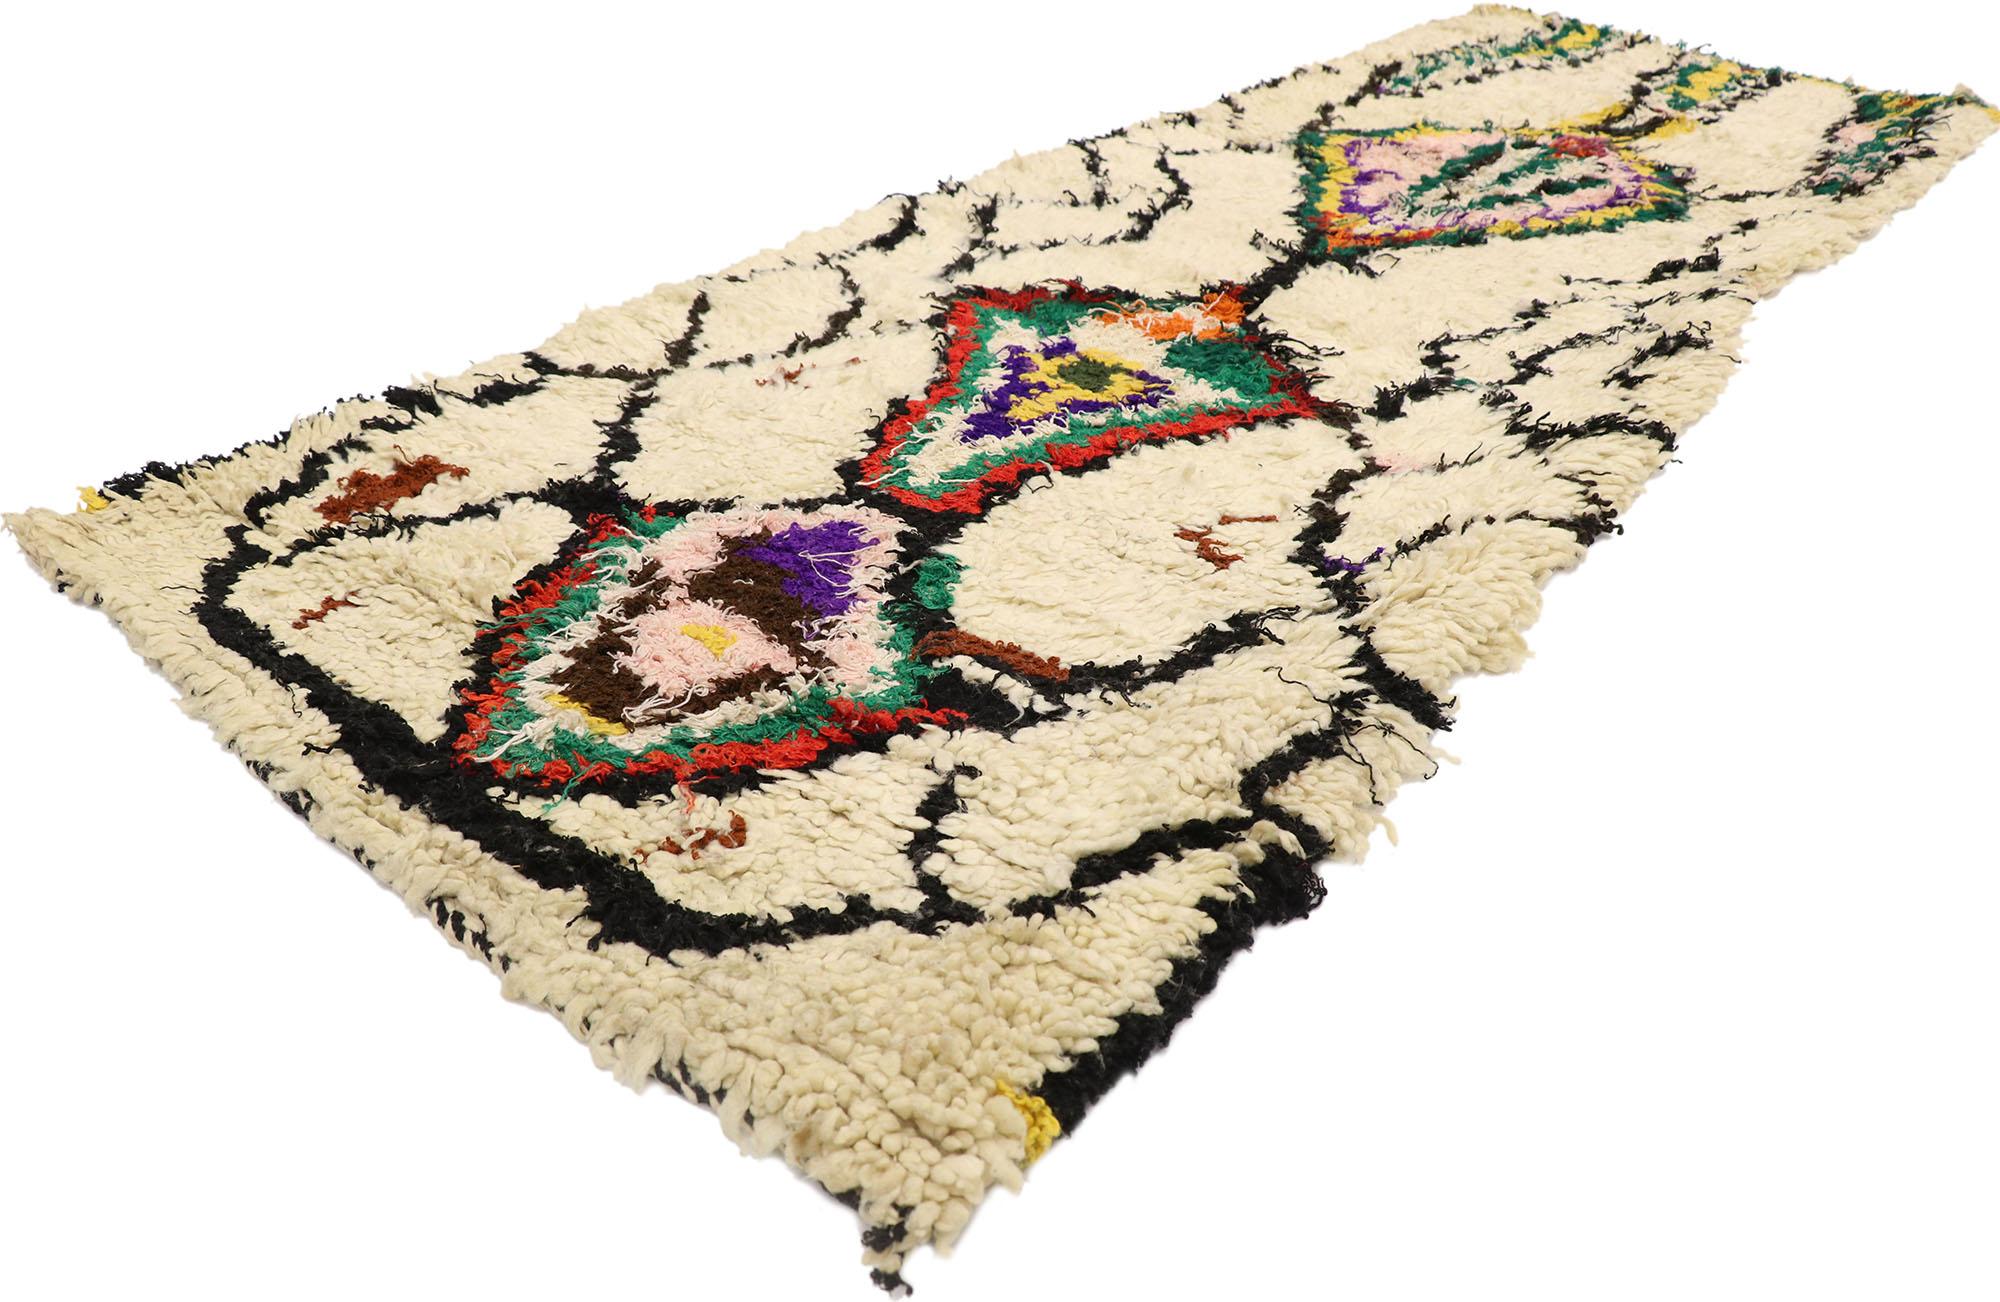 21541 Vintage Berber Moroccan Azilal Rug with Bohemian Tribal Style 02'08 x 06'10. Showcasing a bold expressive tribal design, incredible detail and texture, this hand knotted wool vintage Berber Moroccan Azilal rug is a captivating vision of woven